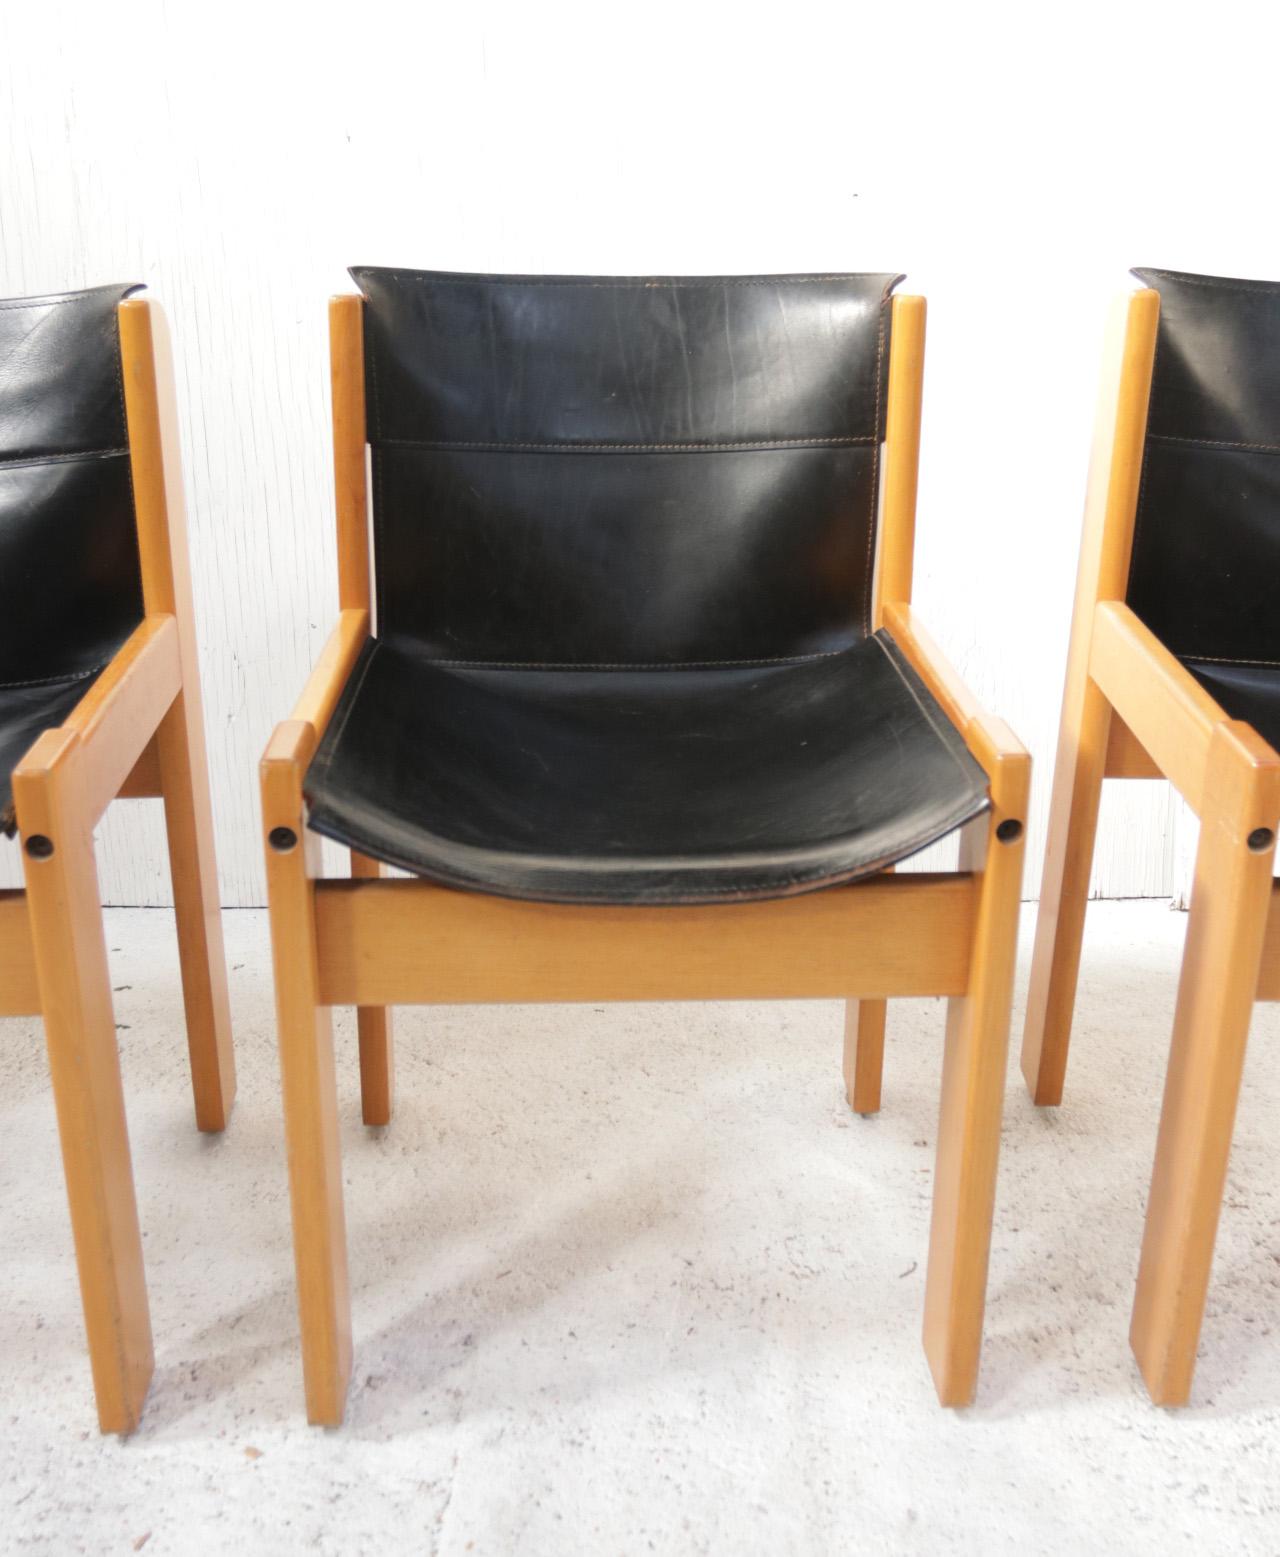 Italian saddle leather chair by Ibisco made around 1969.
This chair can be completely taken apart for transportation if you wish.

 